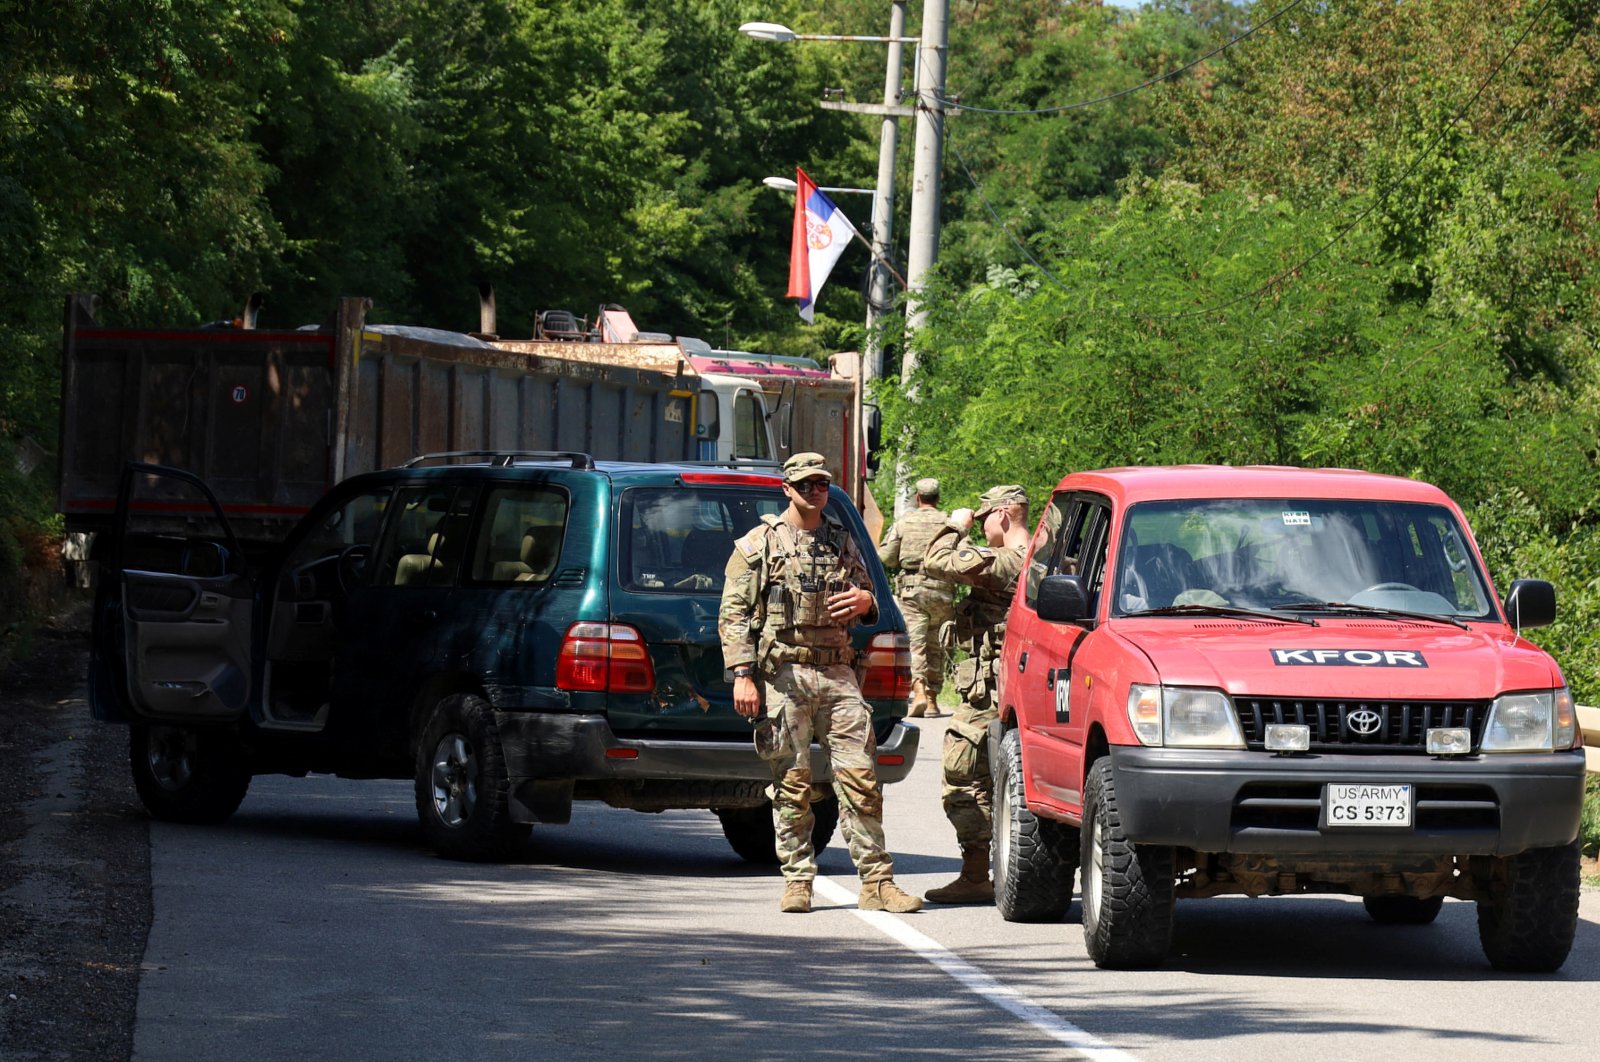 U.S. troops part of KFOR are seen as trucks block a road in Zupce, Kosovo, Aug. 1, 2022. (Reuters Photo)